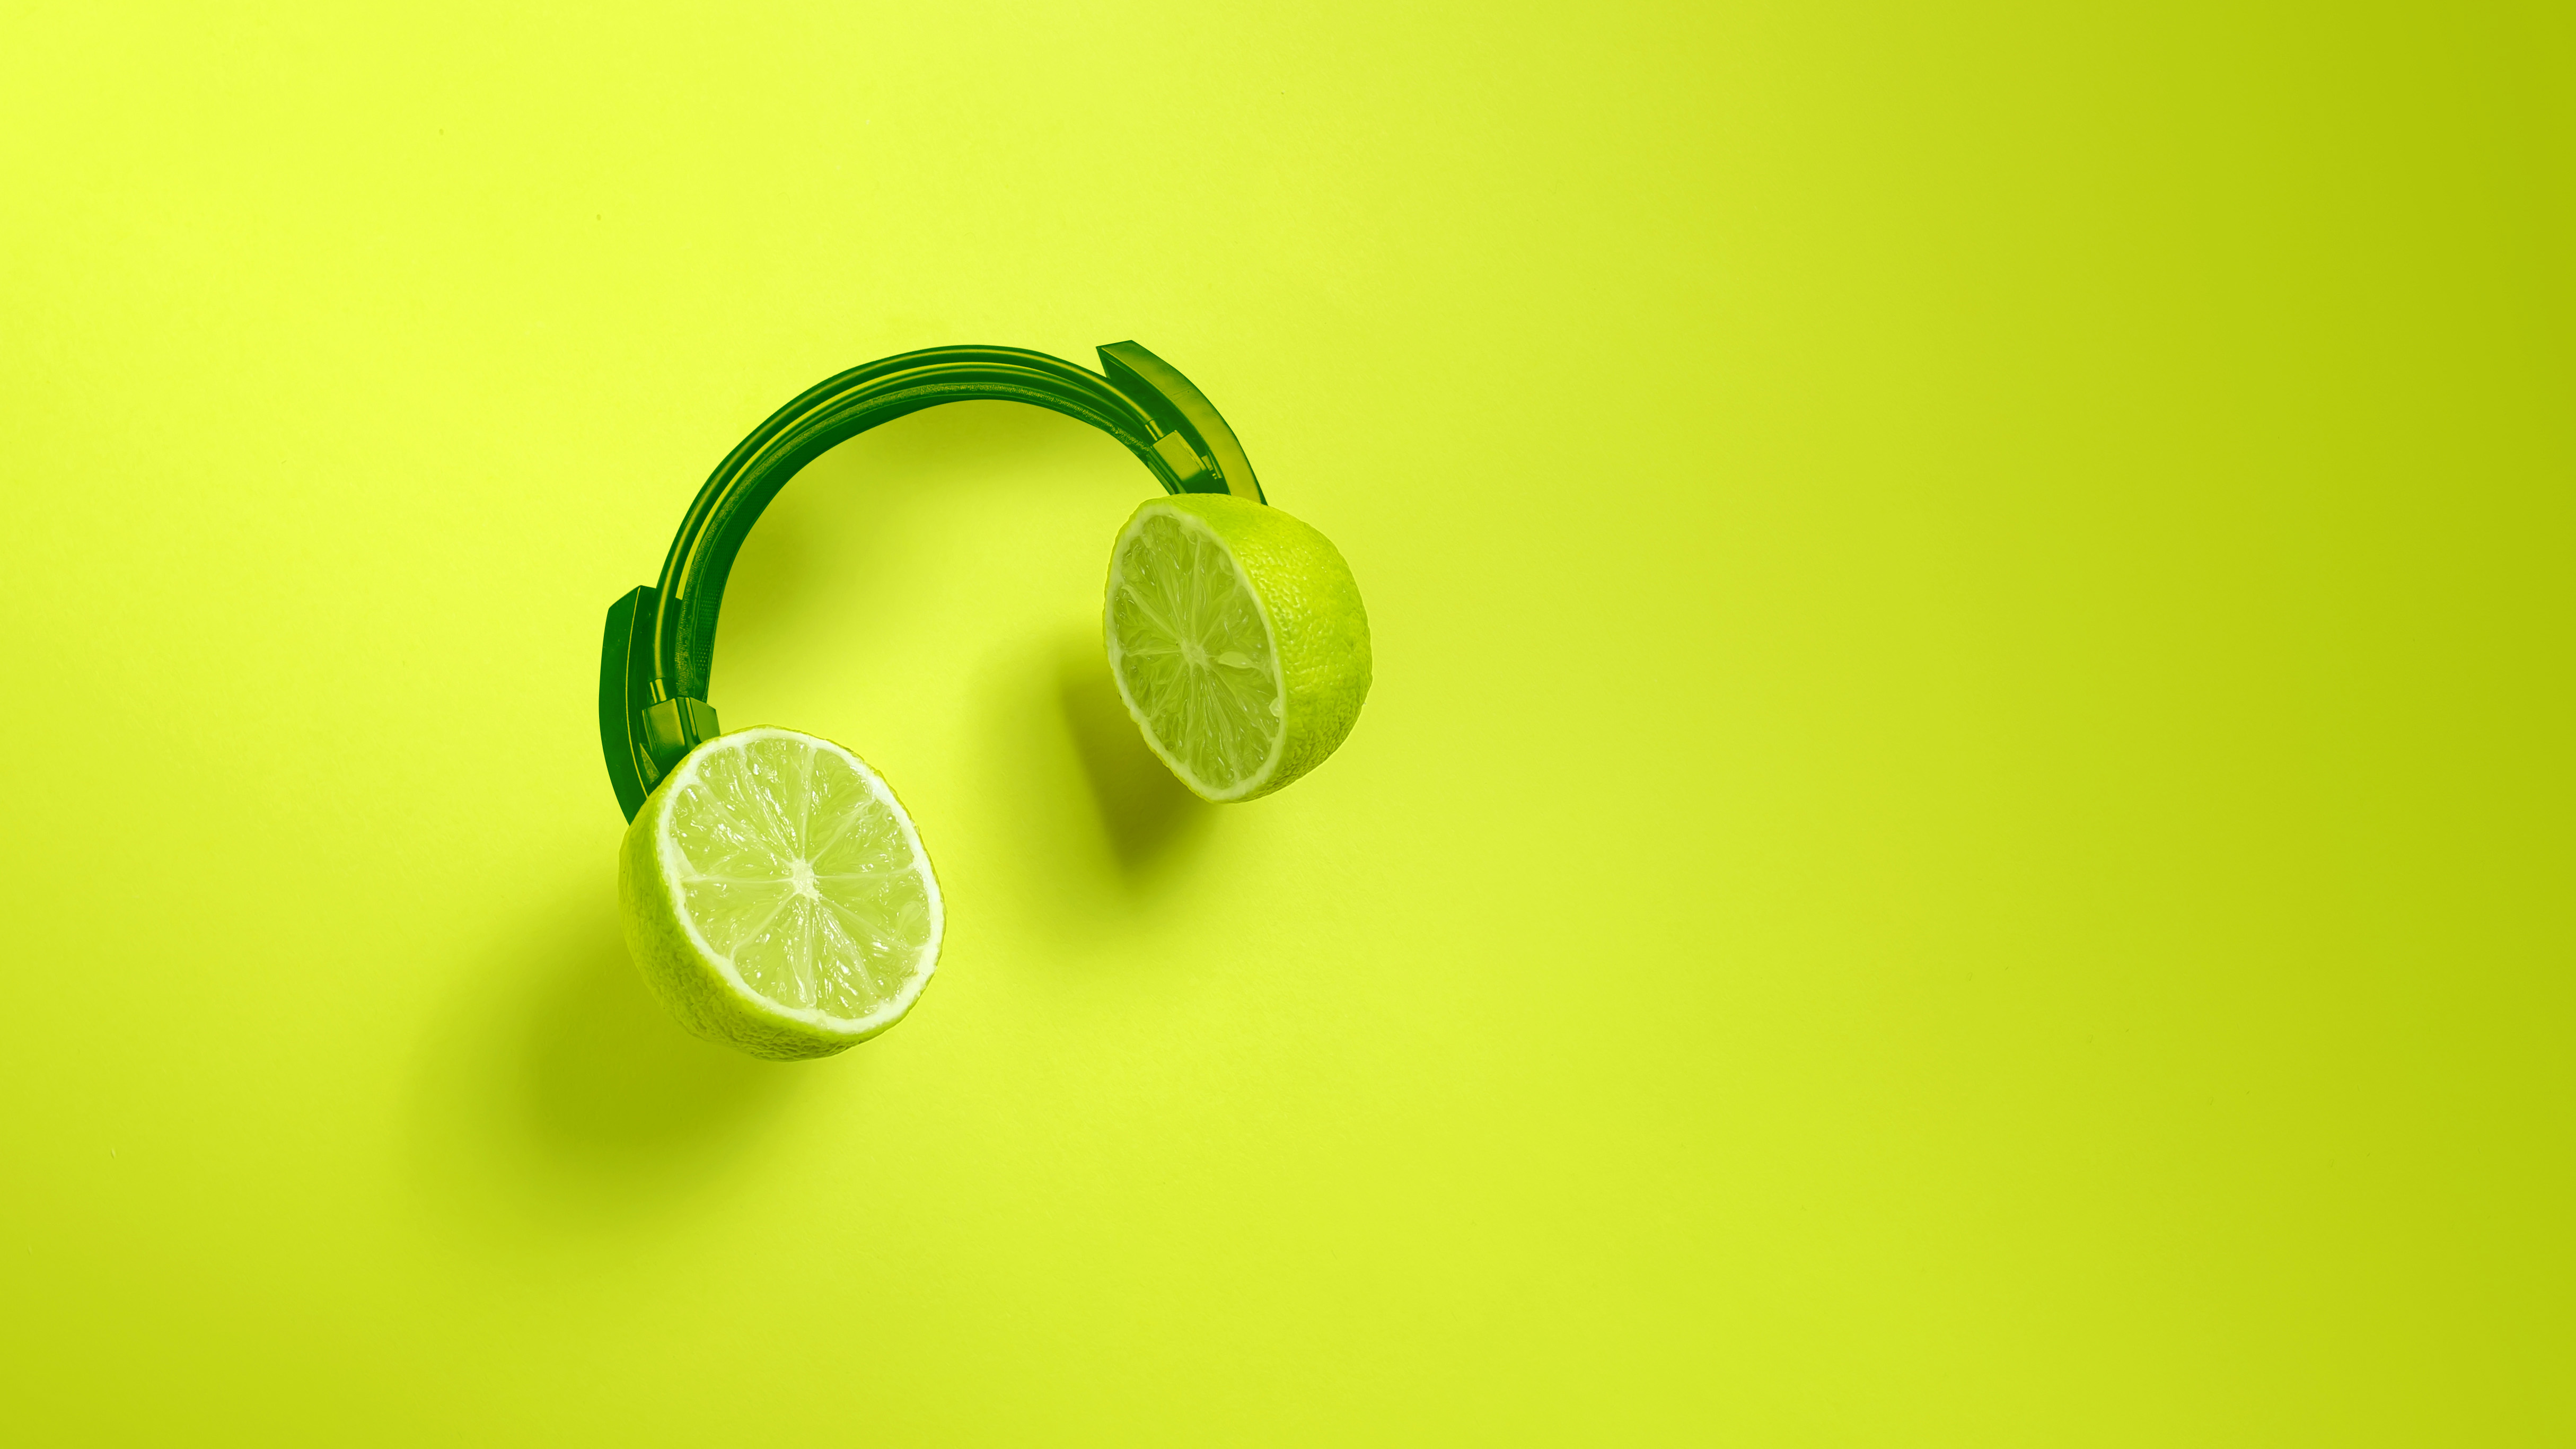 Green headphones with limes as the earpieces on a green background.